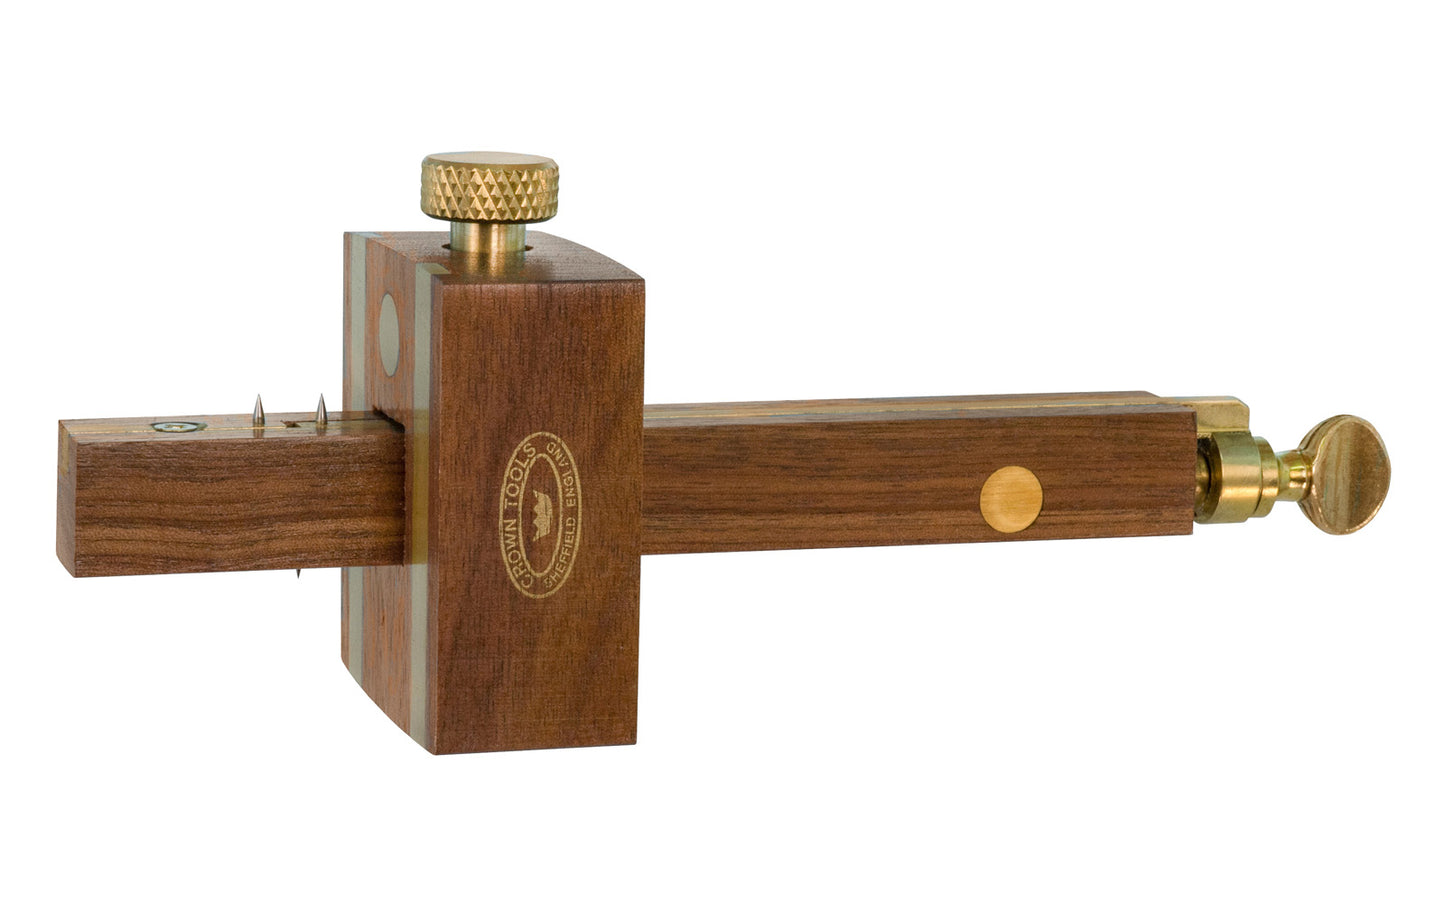 Model 154. Crown Tools Walnut Mortice & Marking Gauge with Screwslide Adjustment. Knurled brass thumbscrew on gage. Brass inlay. Walnut wood.  Made in England.